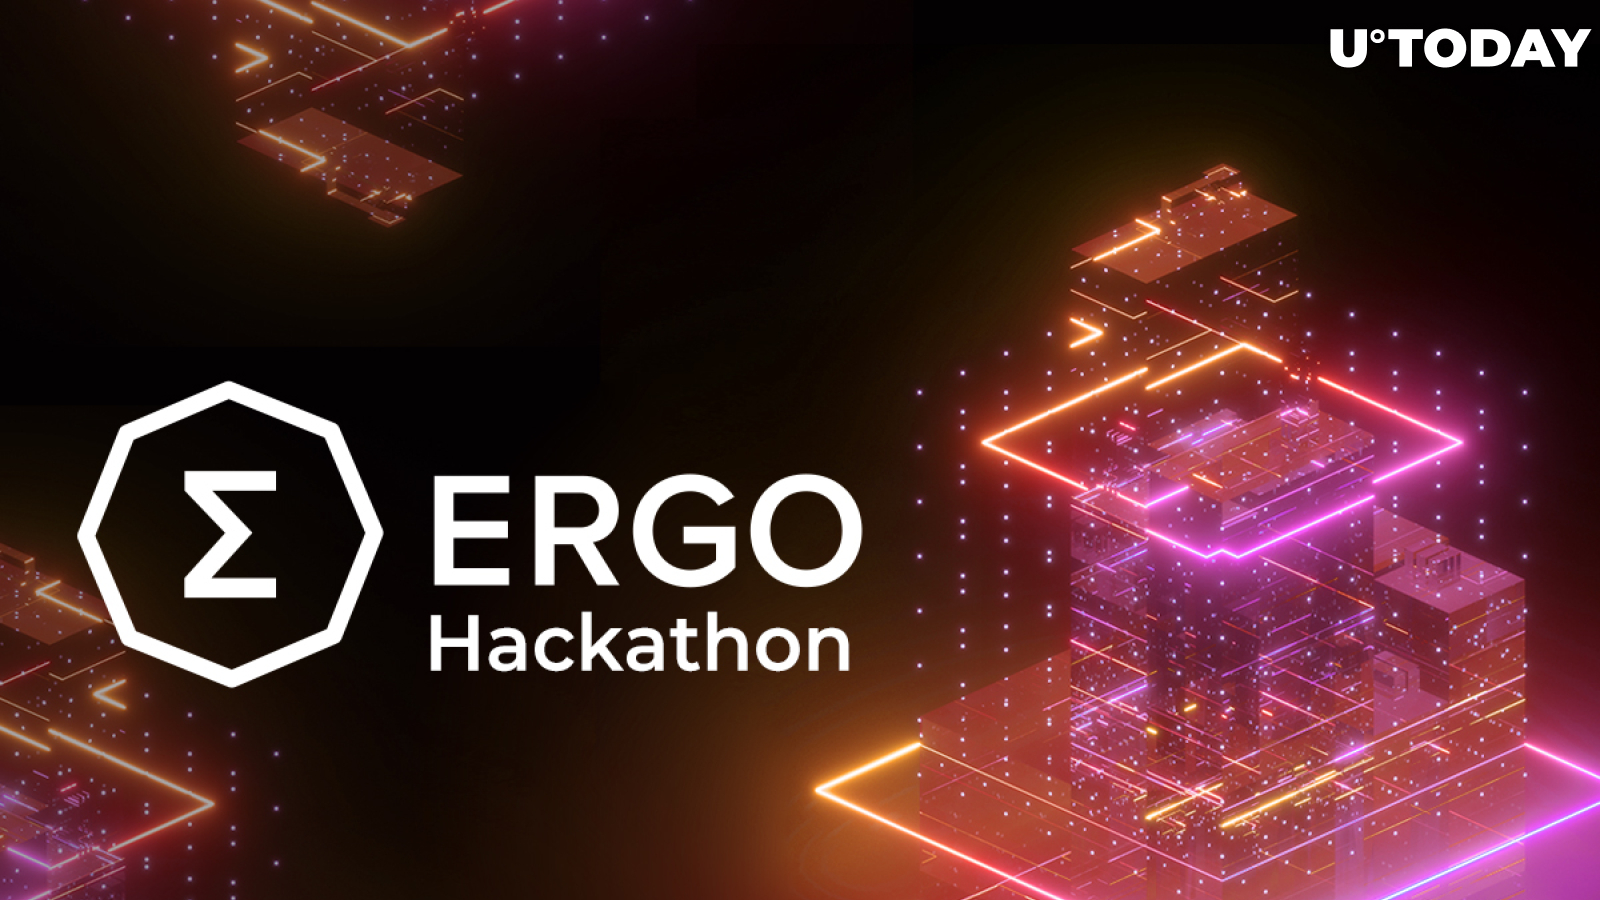 Get Ready for Another Exciting Ergo Hackathon This Year